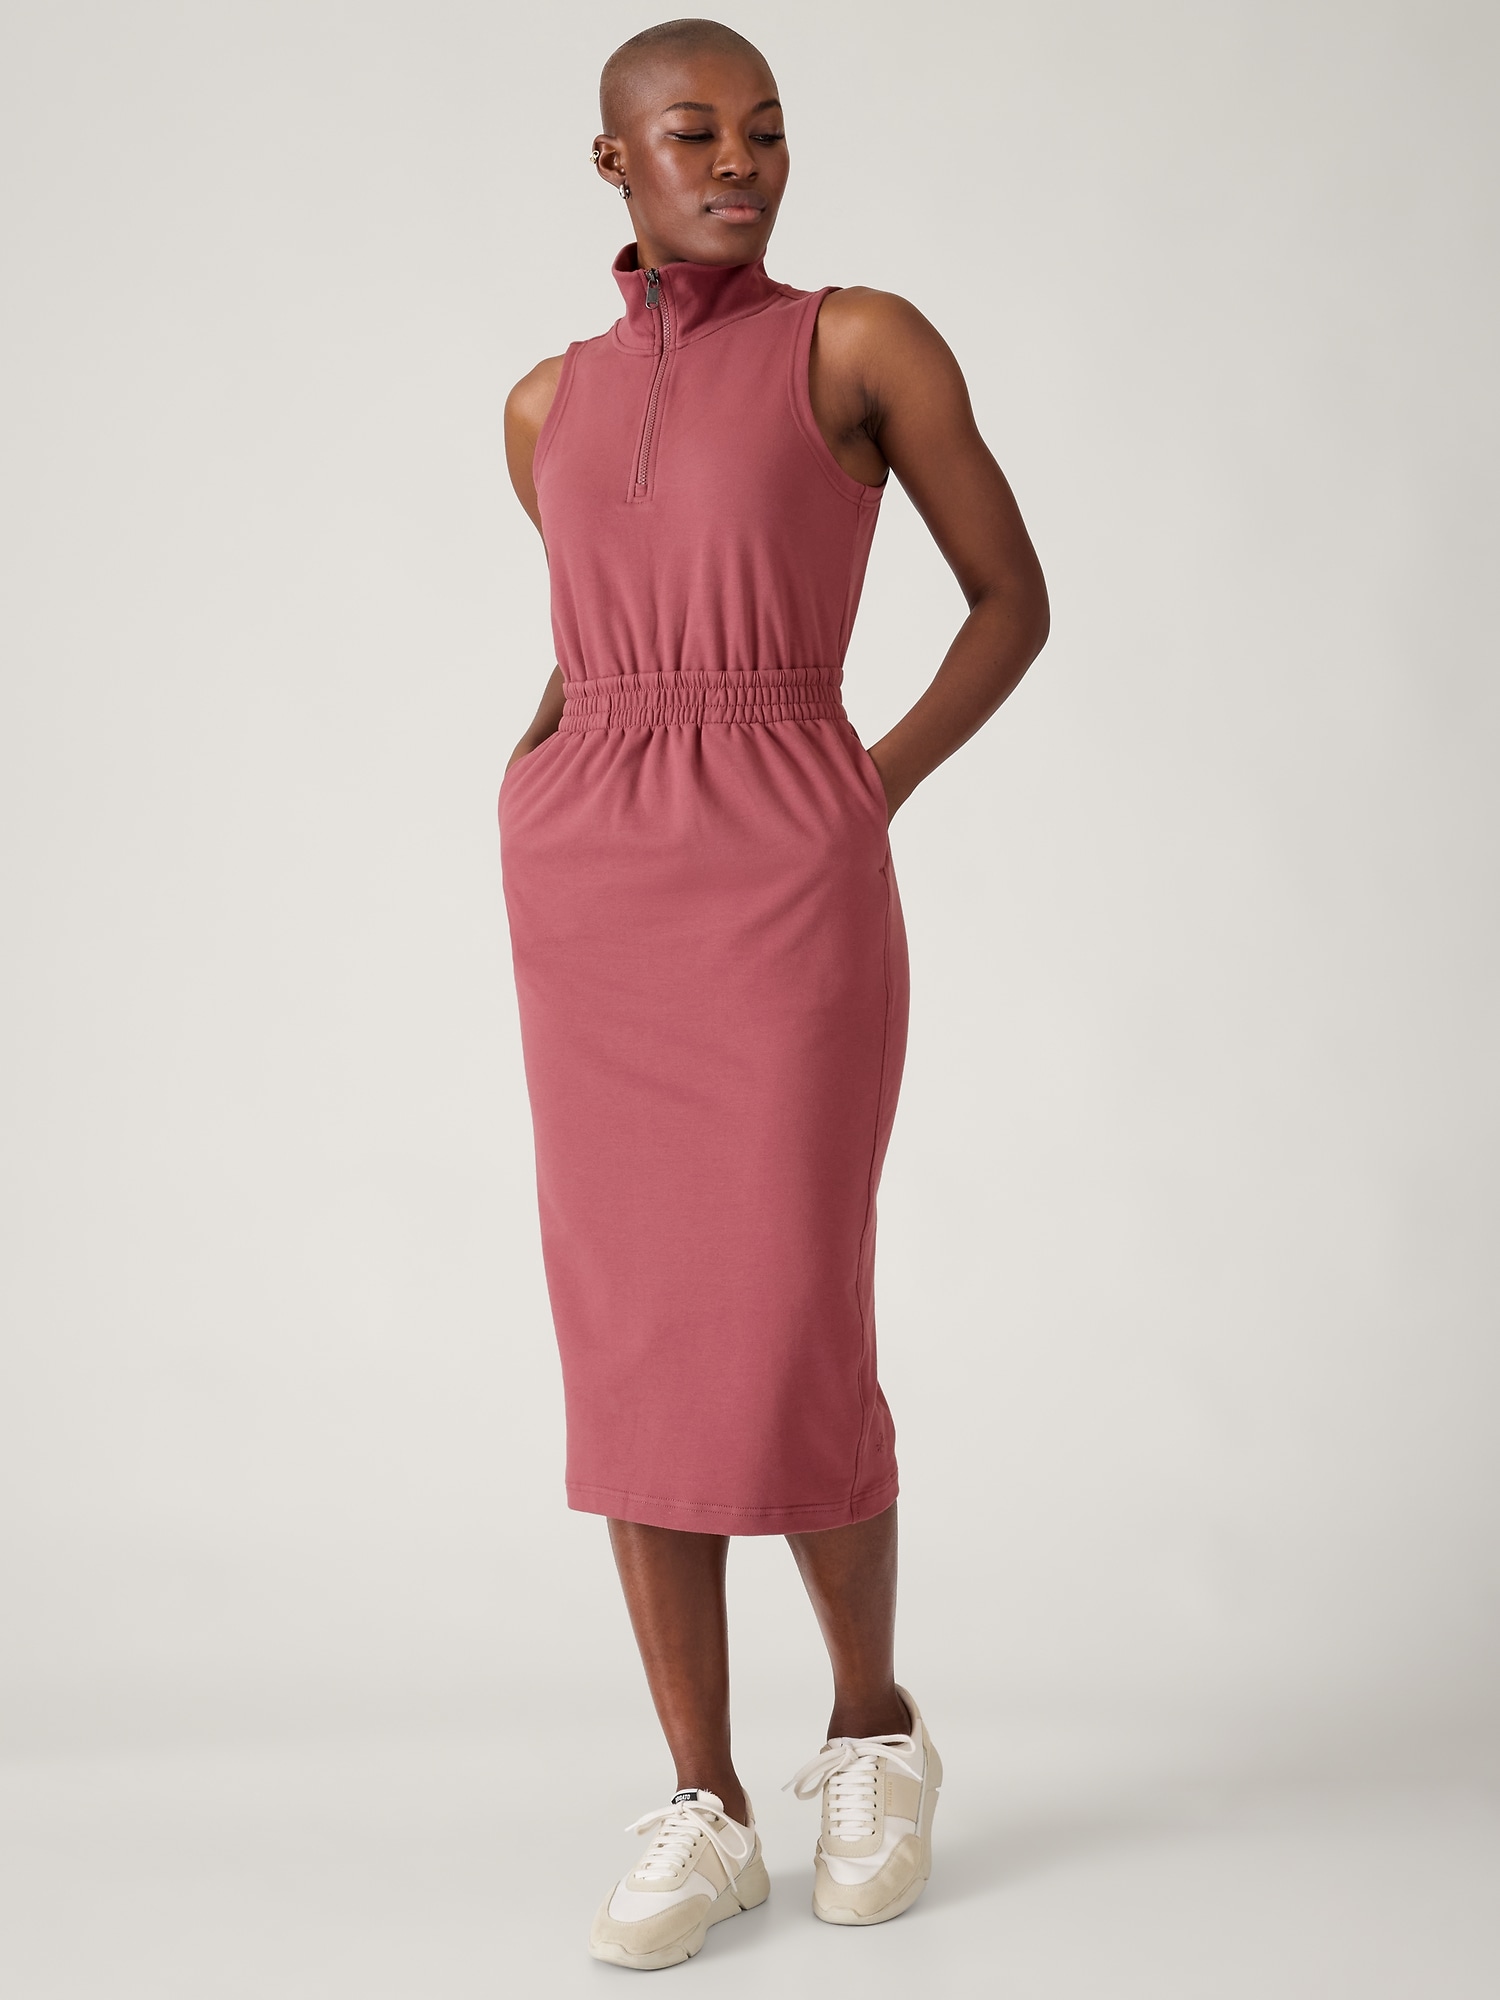 Athleta Retroterry Dress In Rosewood